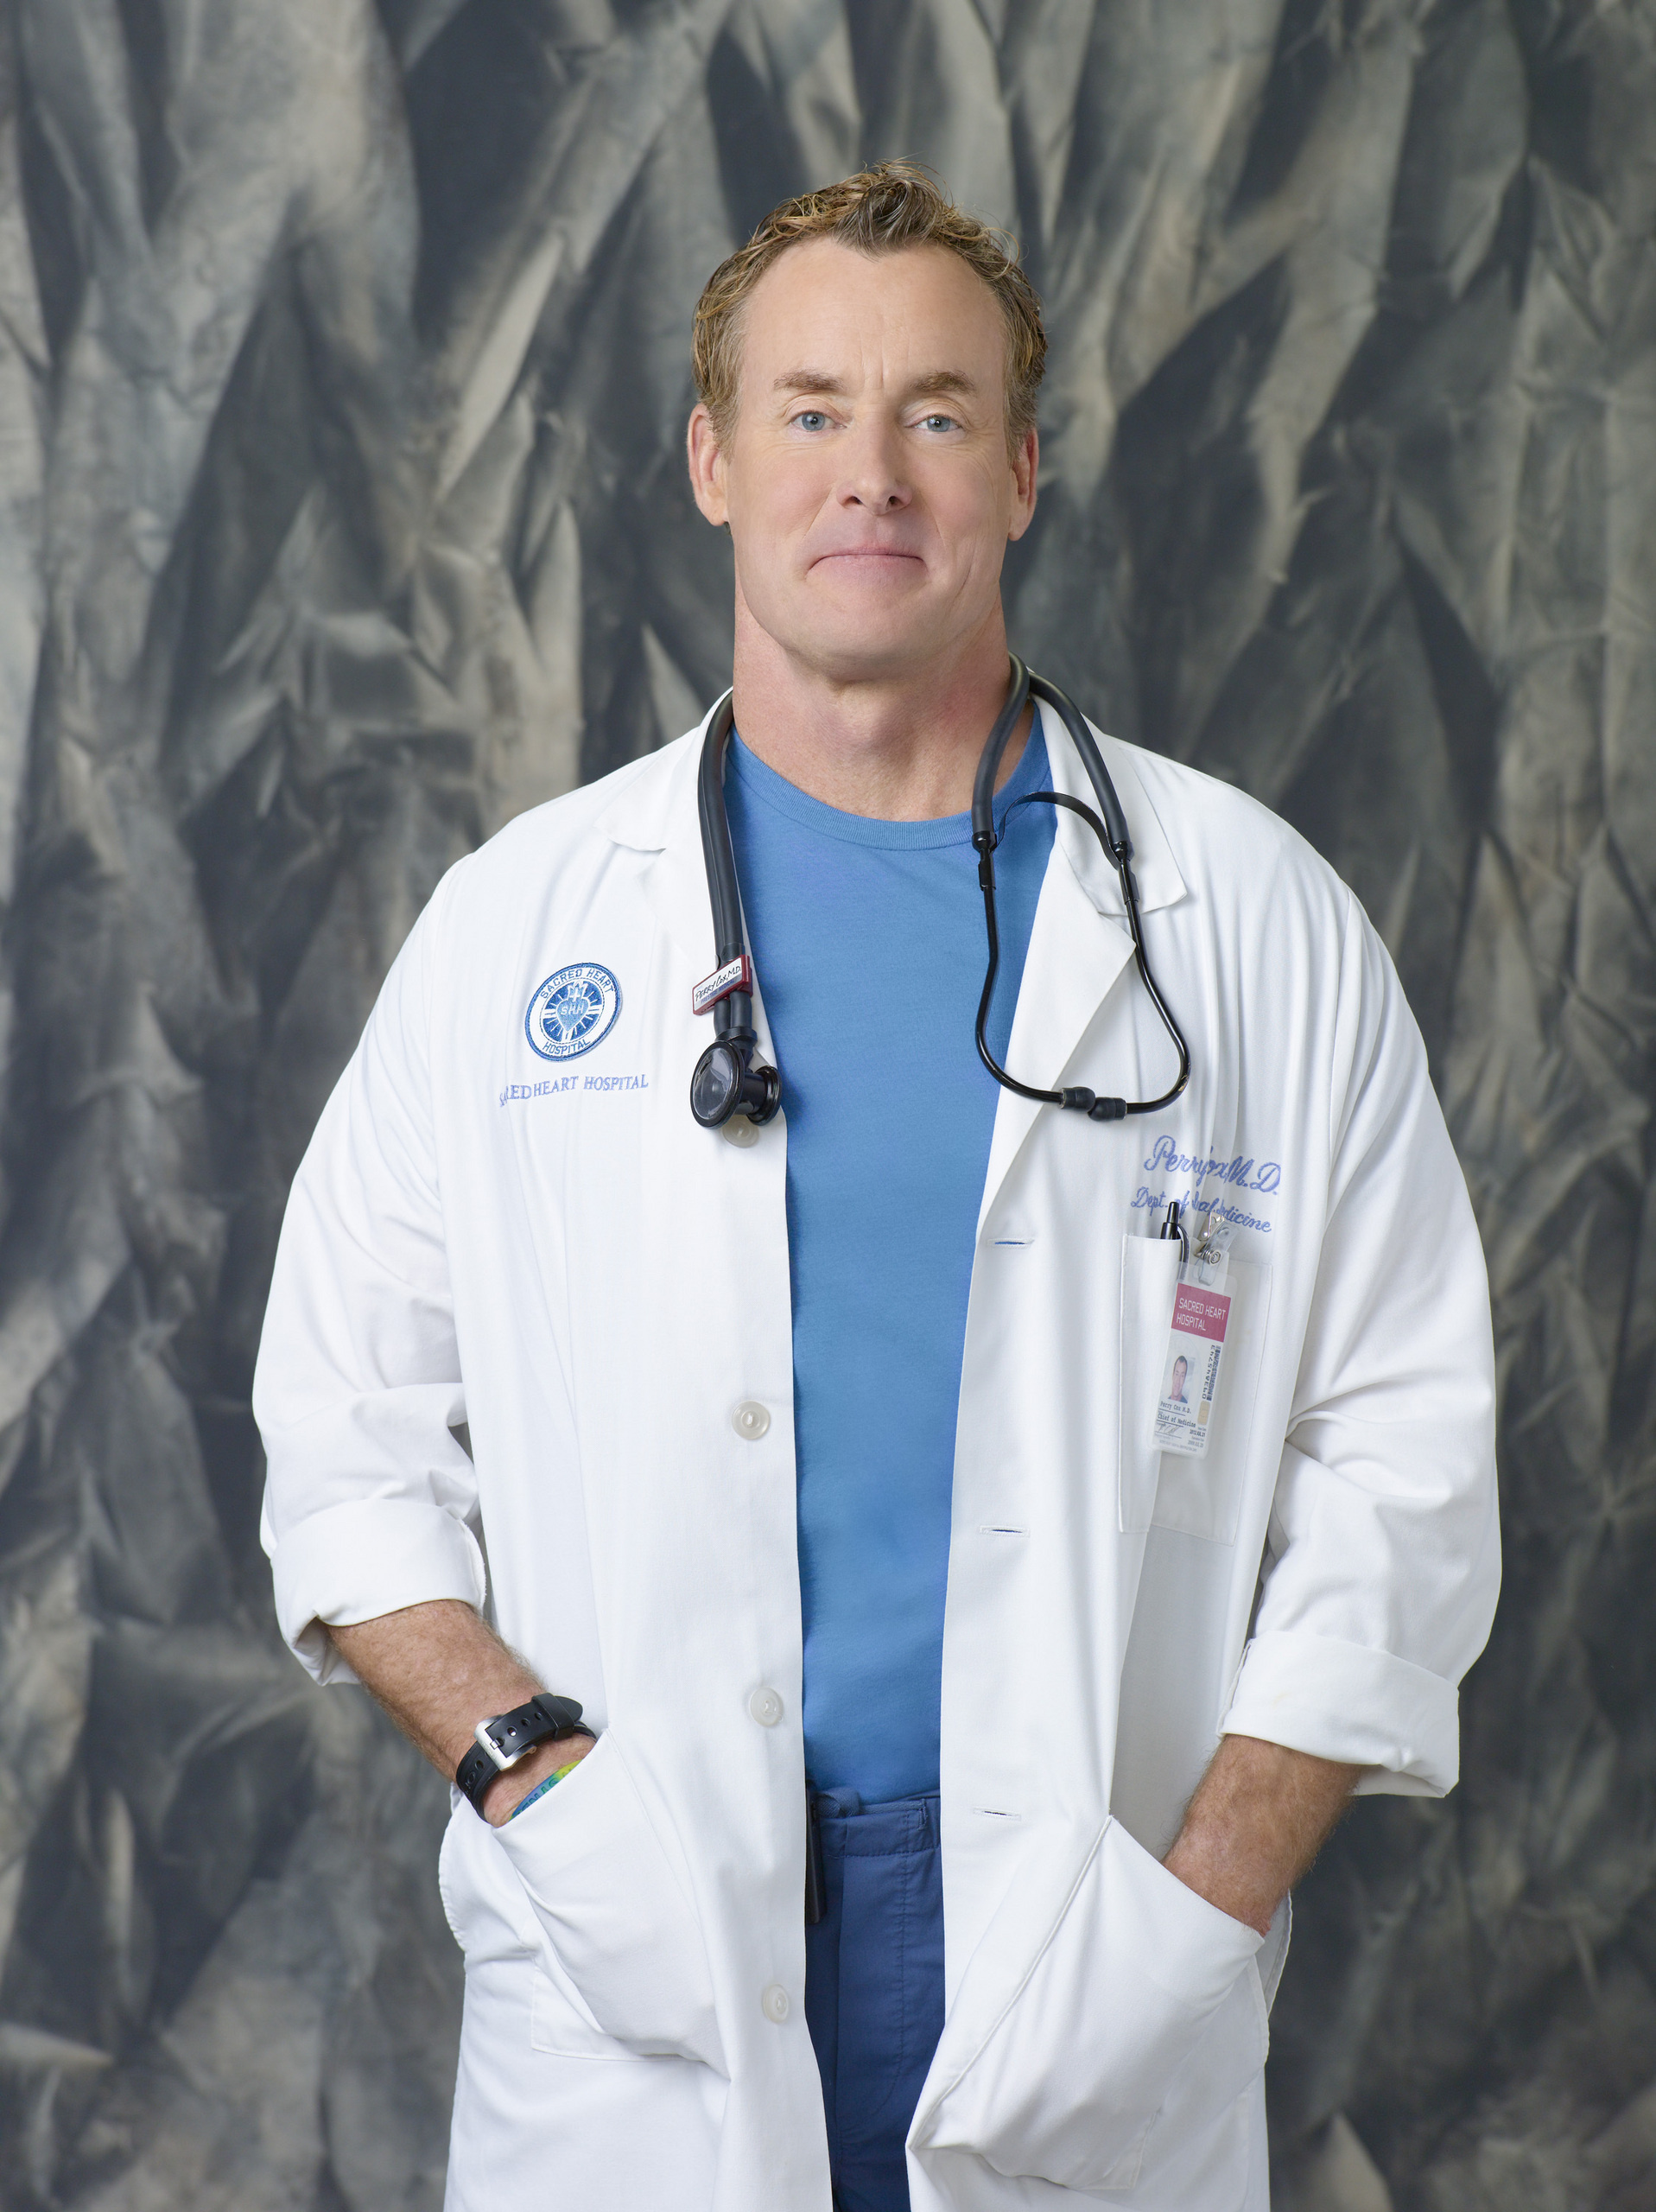 John C. McGinley: Scrubs, Season 9, Dr. Perry Cox, Created by Bill Lawrence and produced by Doozer and ABC Studio. 1920x2560 HD Wallpaper.